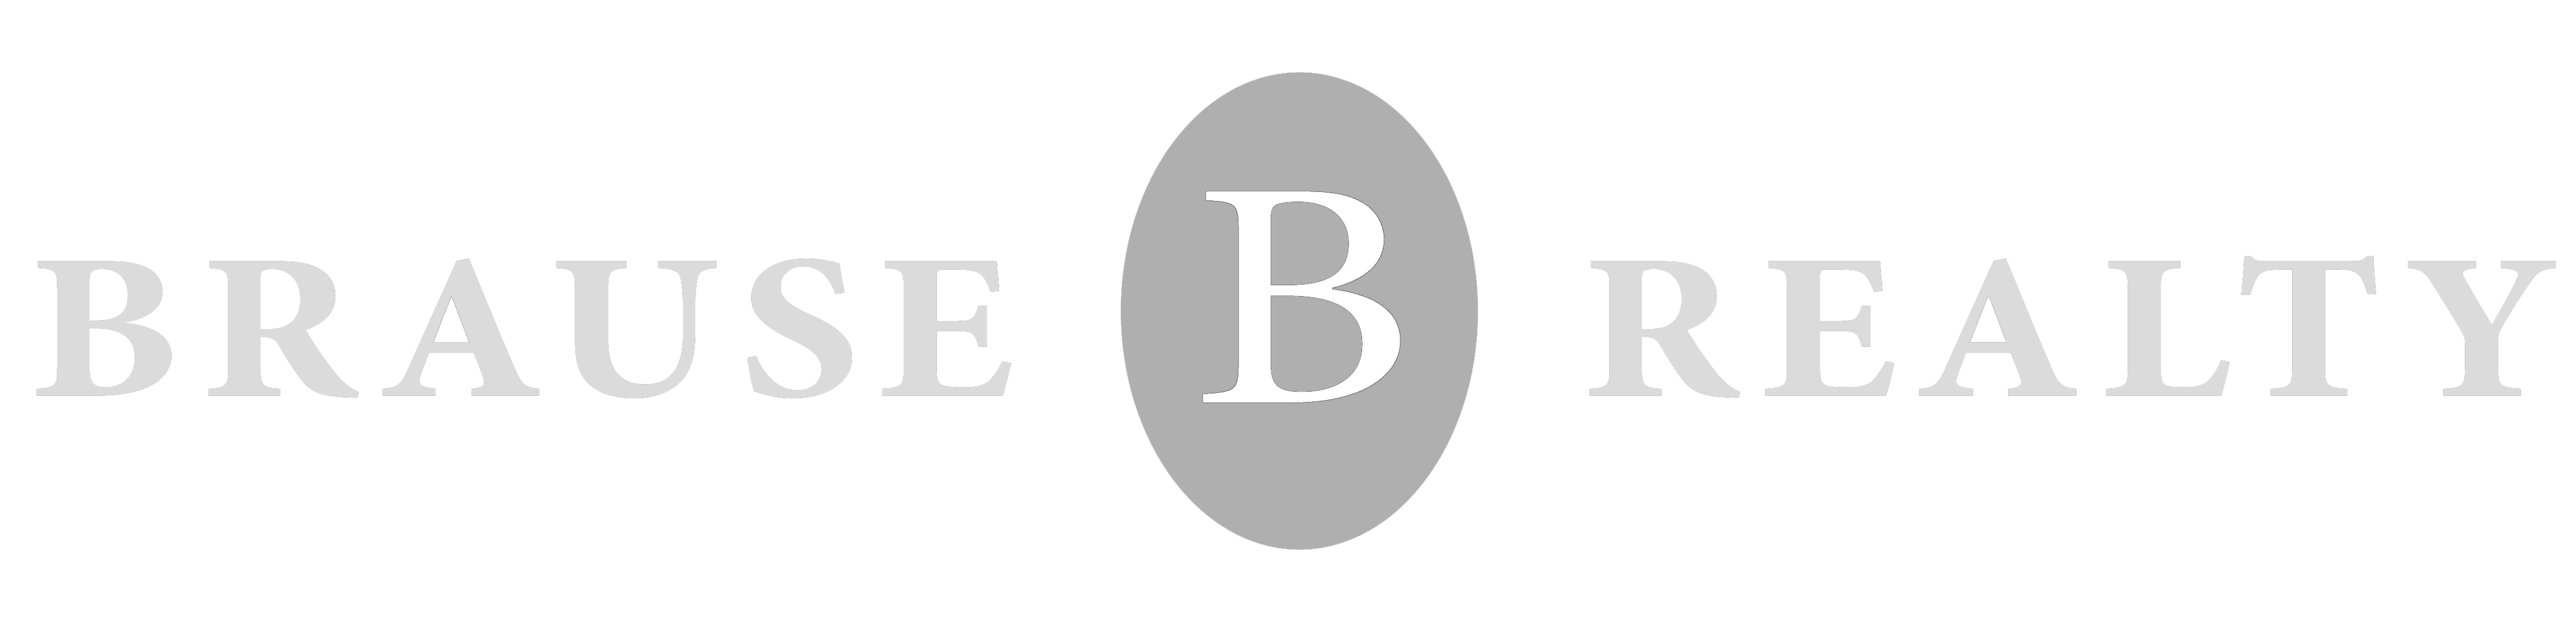 Brause Realty logo grey scale